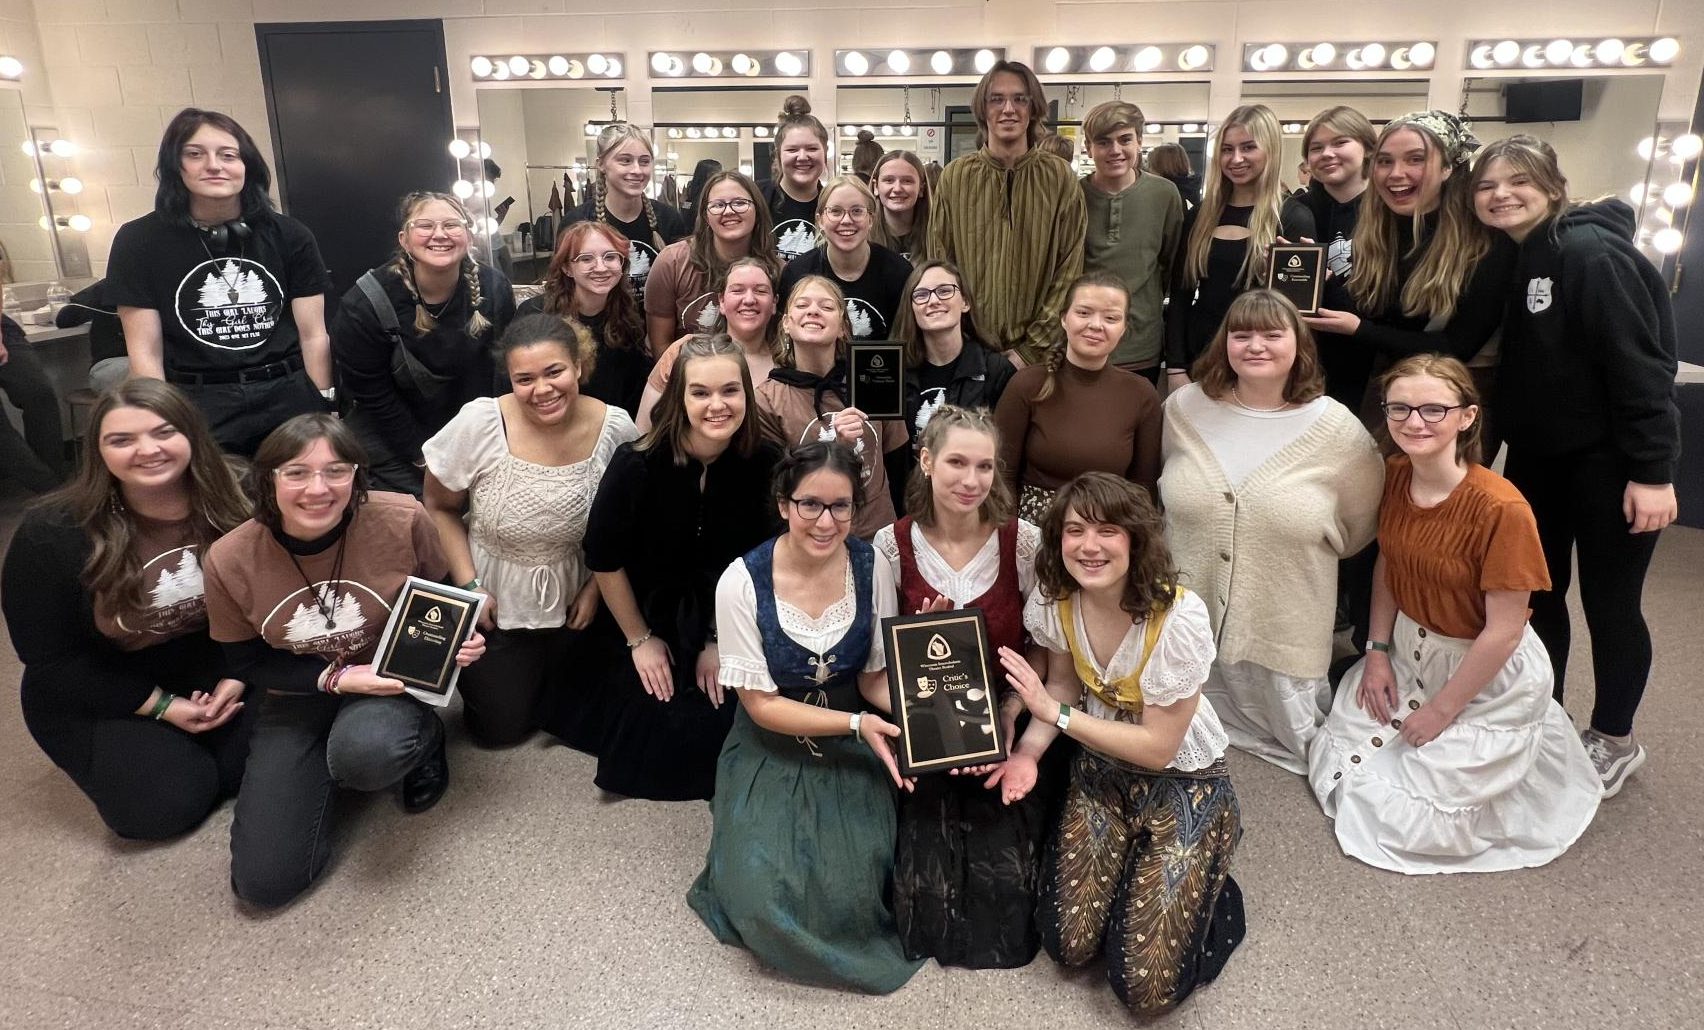 Neenahs One Act earned a total point average above the required 2.67, making them eligible for the Critics Choice Award, the highest honor a performance can receive.